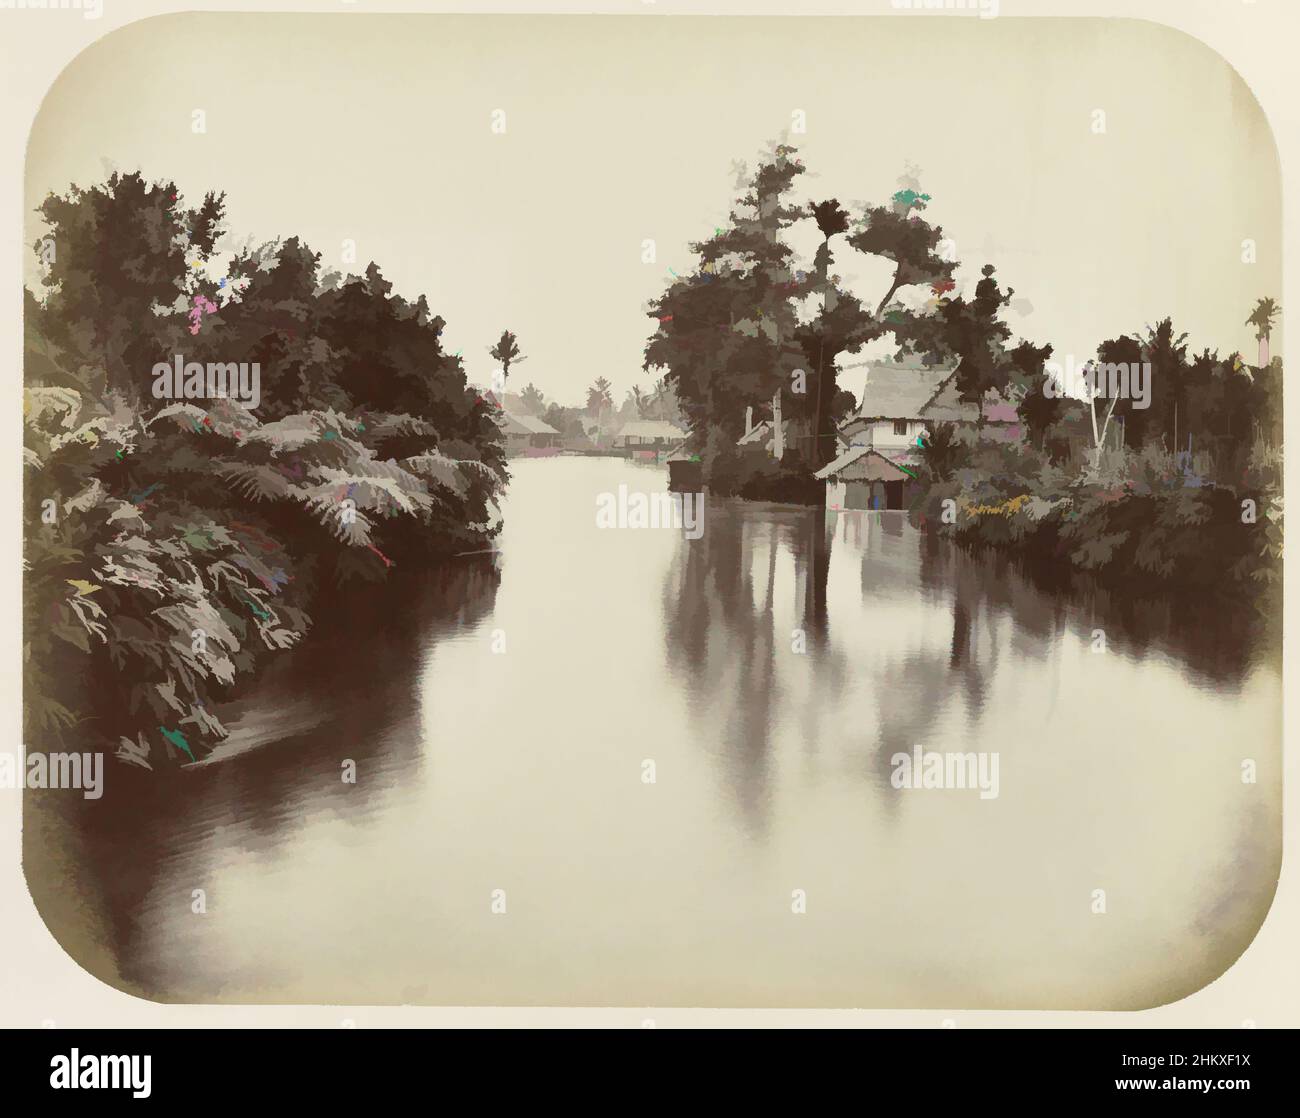 Art inspired by Houses on the Tondano River at Manado, Houses located on the Tondano River at Manado on Celebes. Pasted-in photo in the photo album titled: Views of Java., Woodbury & Page, Celebes, 1860 - 1880, photographic support, albumen print, height 185 mm × width 237 mm, Classic works modernized by Artotop with a splash of modernity. Shapes, color and value, eye-catching visual impact on art. Emotions through freedom of artworks in a contemporary way. A timeless message pursuing a wildly creative new direction. Artists turning to the digital medium and creating the Artotop NFT Stock Photo